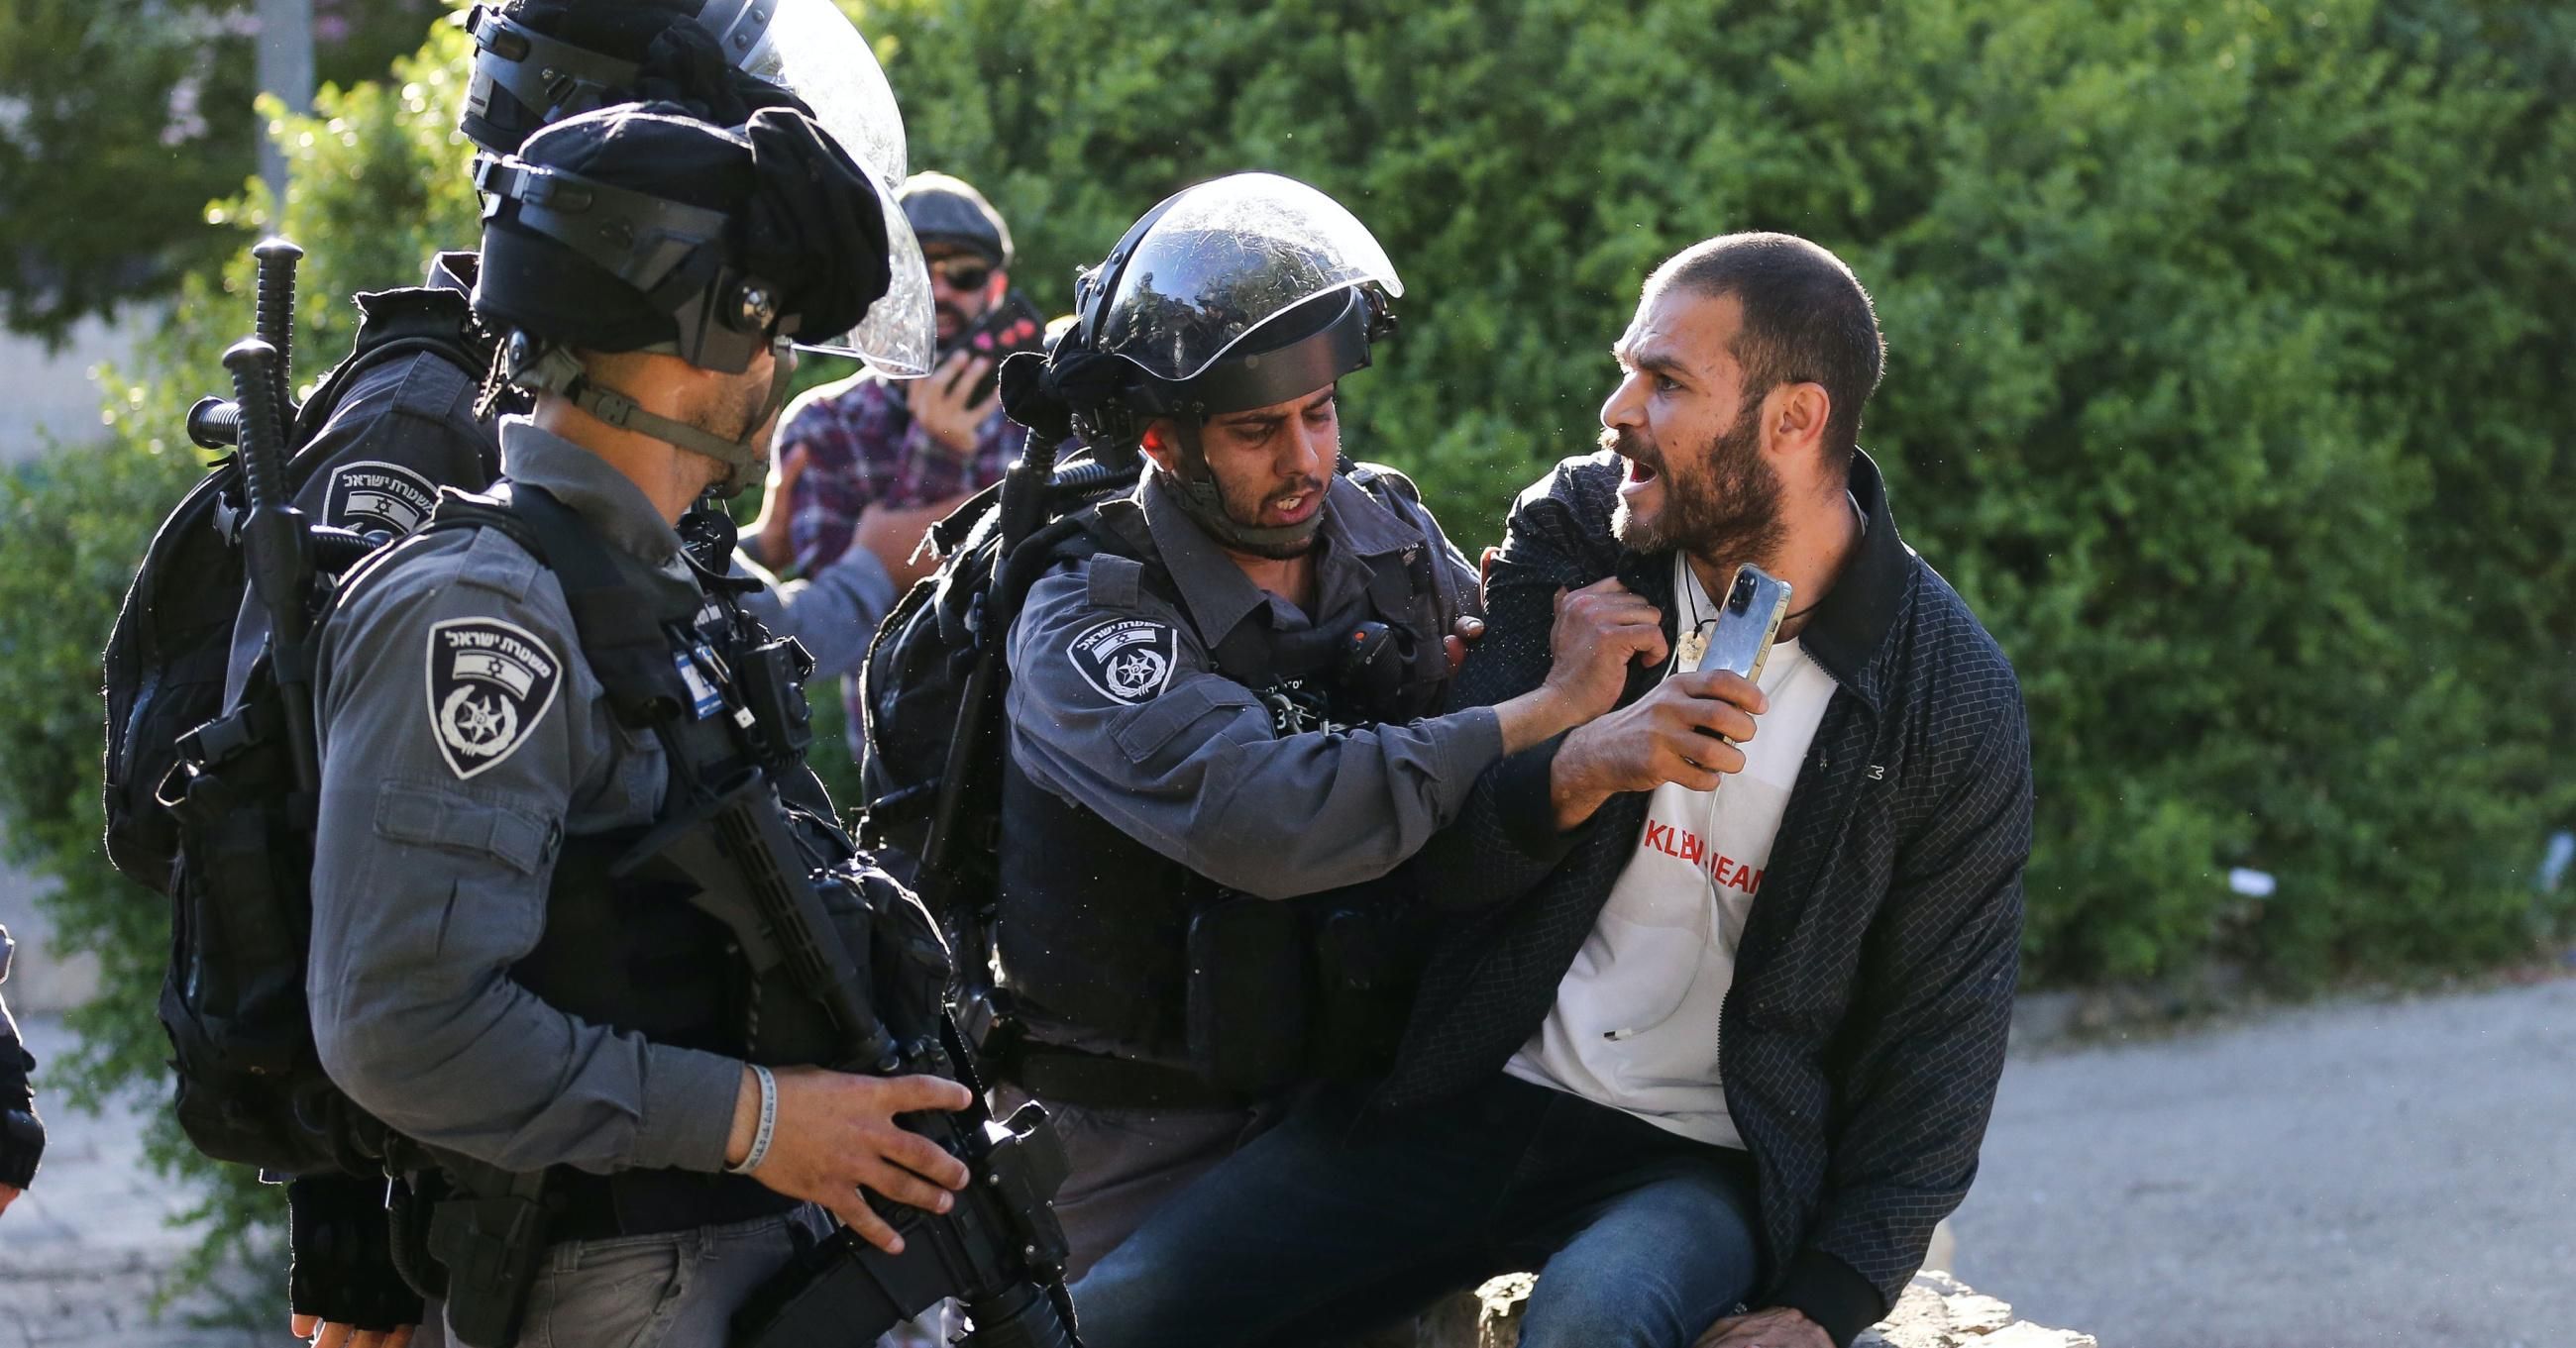 Israeli forces move in to break up a Palestinian demonstration in the Sheikh Jarrah neighborhood of illegally occupied East Jerusalem on May 22, 2021. (Photo: Mostafa Alkharouf/Andalou Agency via Getty Images) 